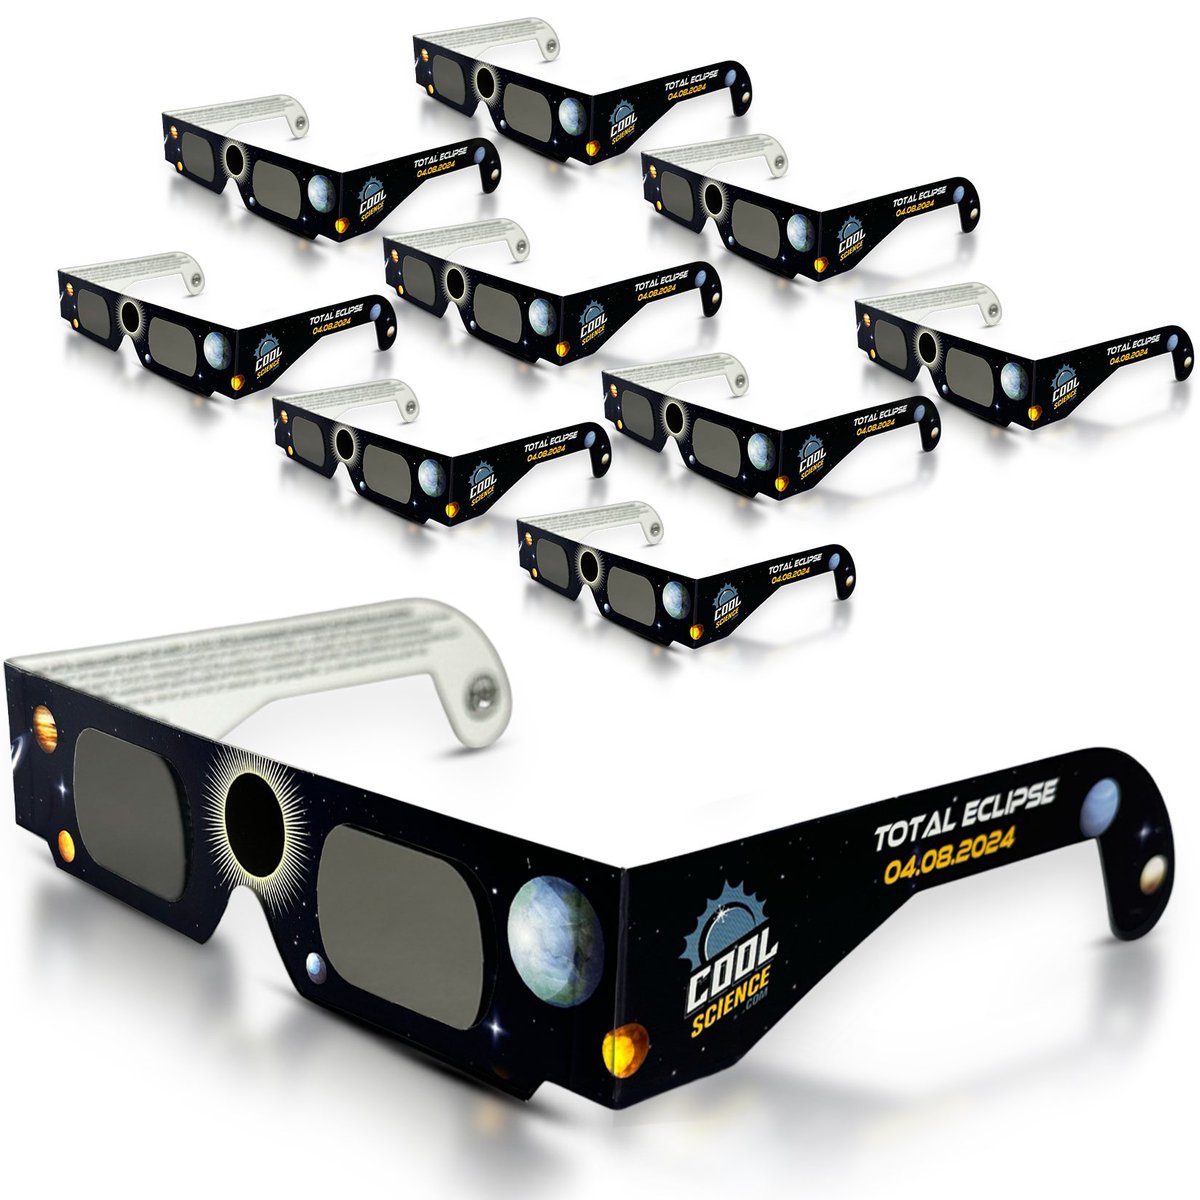 Let’s get ready for the April 8 total #solar #eclipse 

#Retweet
#Tag 2 Friends
#Follow

for a chance to win 20 pair of Cool Science Solar Eclipse Glasses!

Winner chosen every Friday through the end of February!

#2024solareclipse #totalsolareclipse #eyeprotection